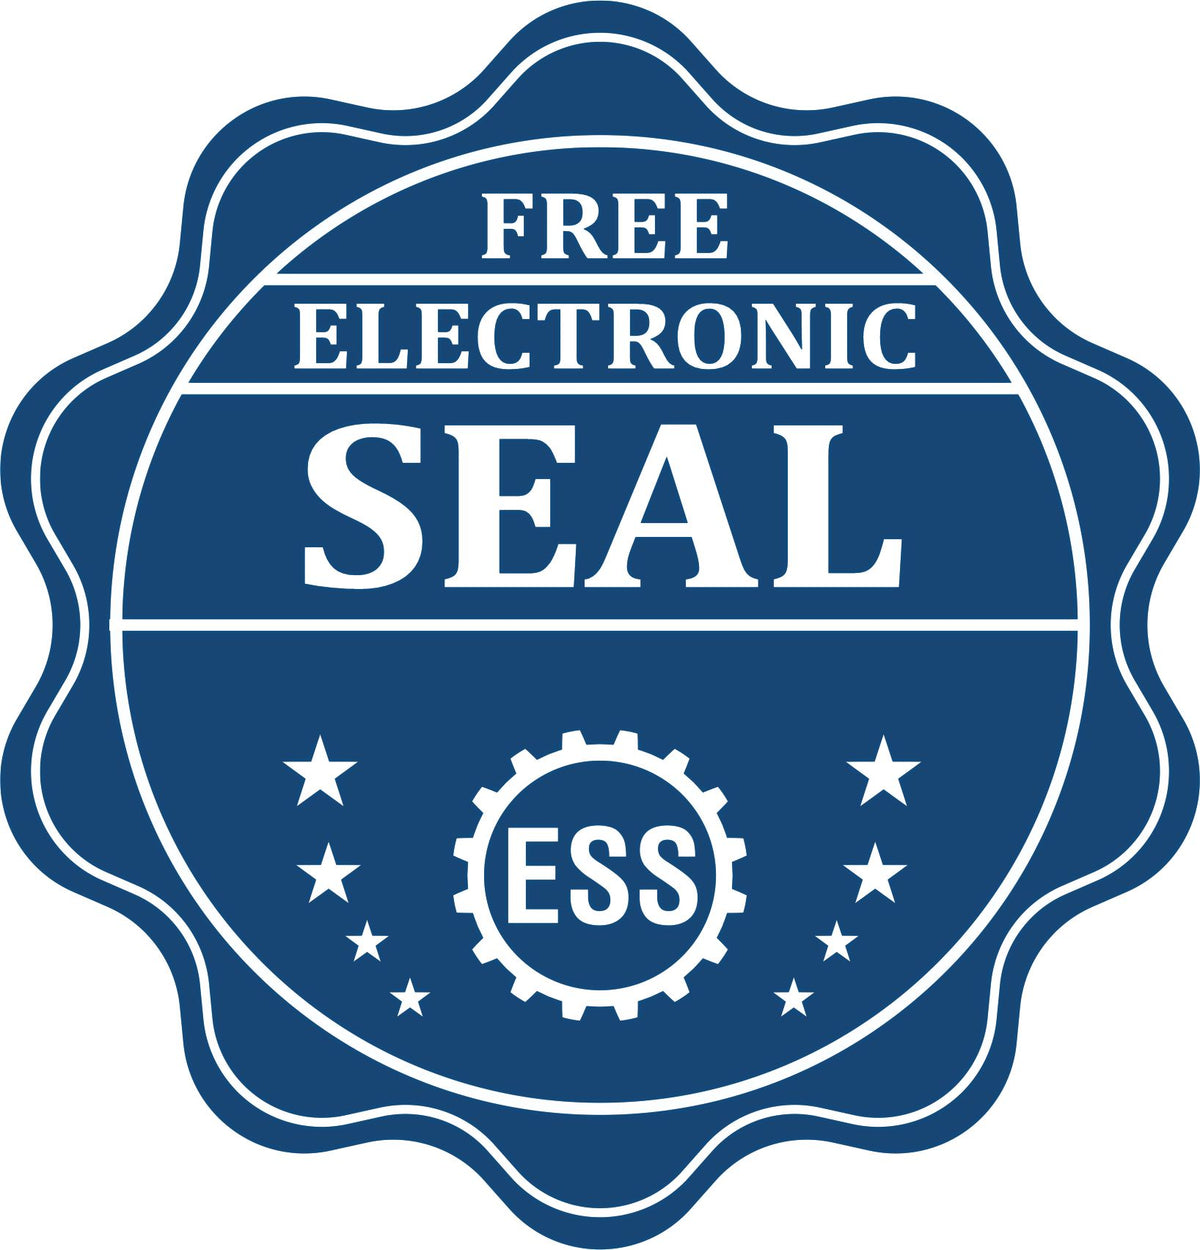 A badge showing a free electronic seal for the Hybrid Kansas Geologist Seal with stars and the ESS gear on the emblem.